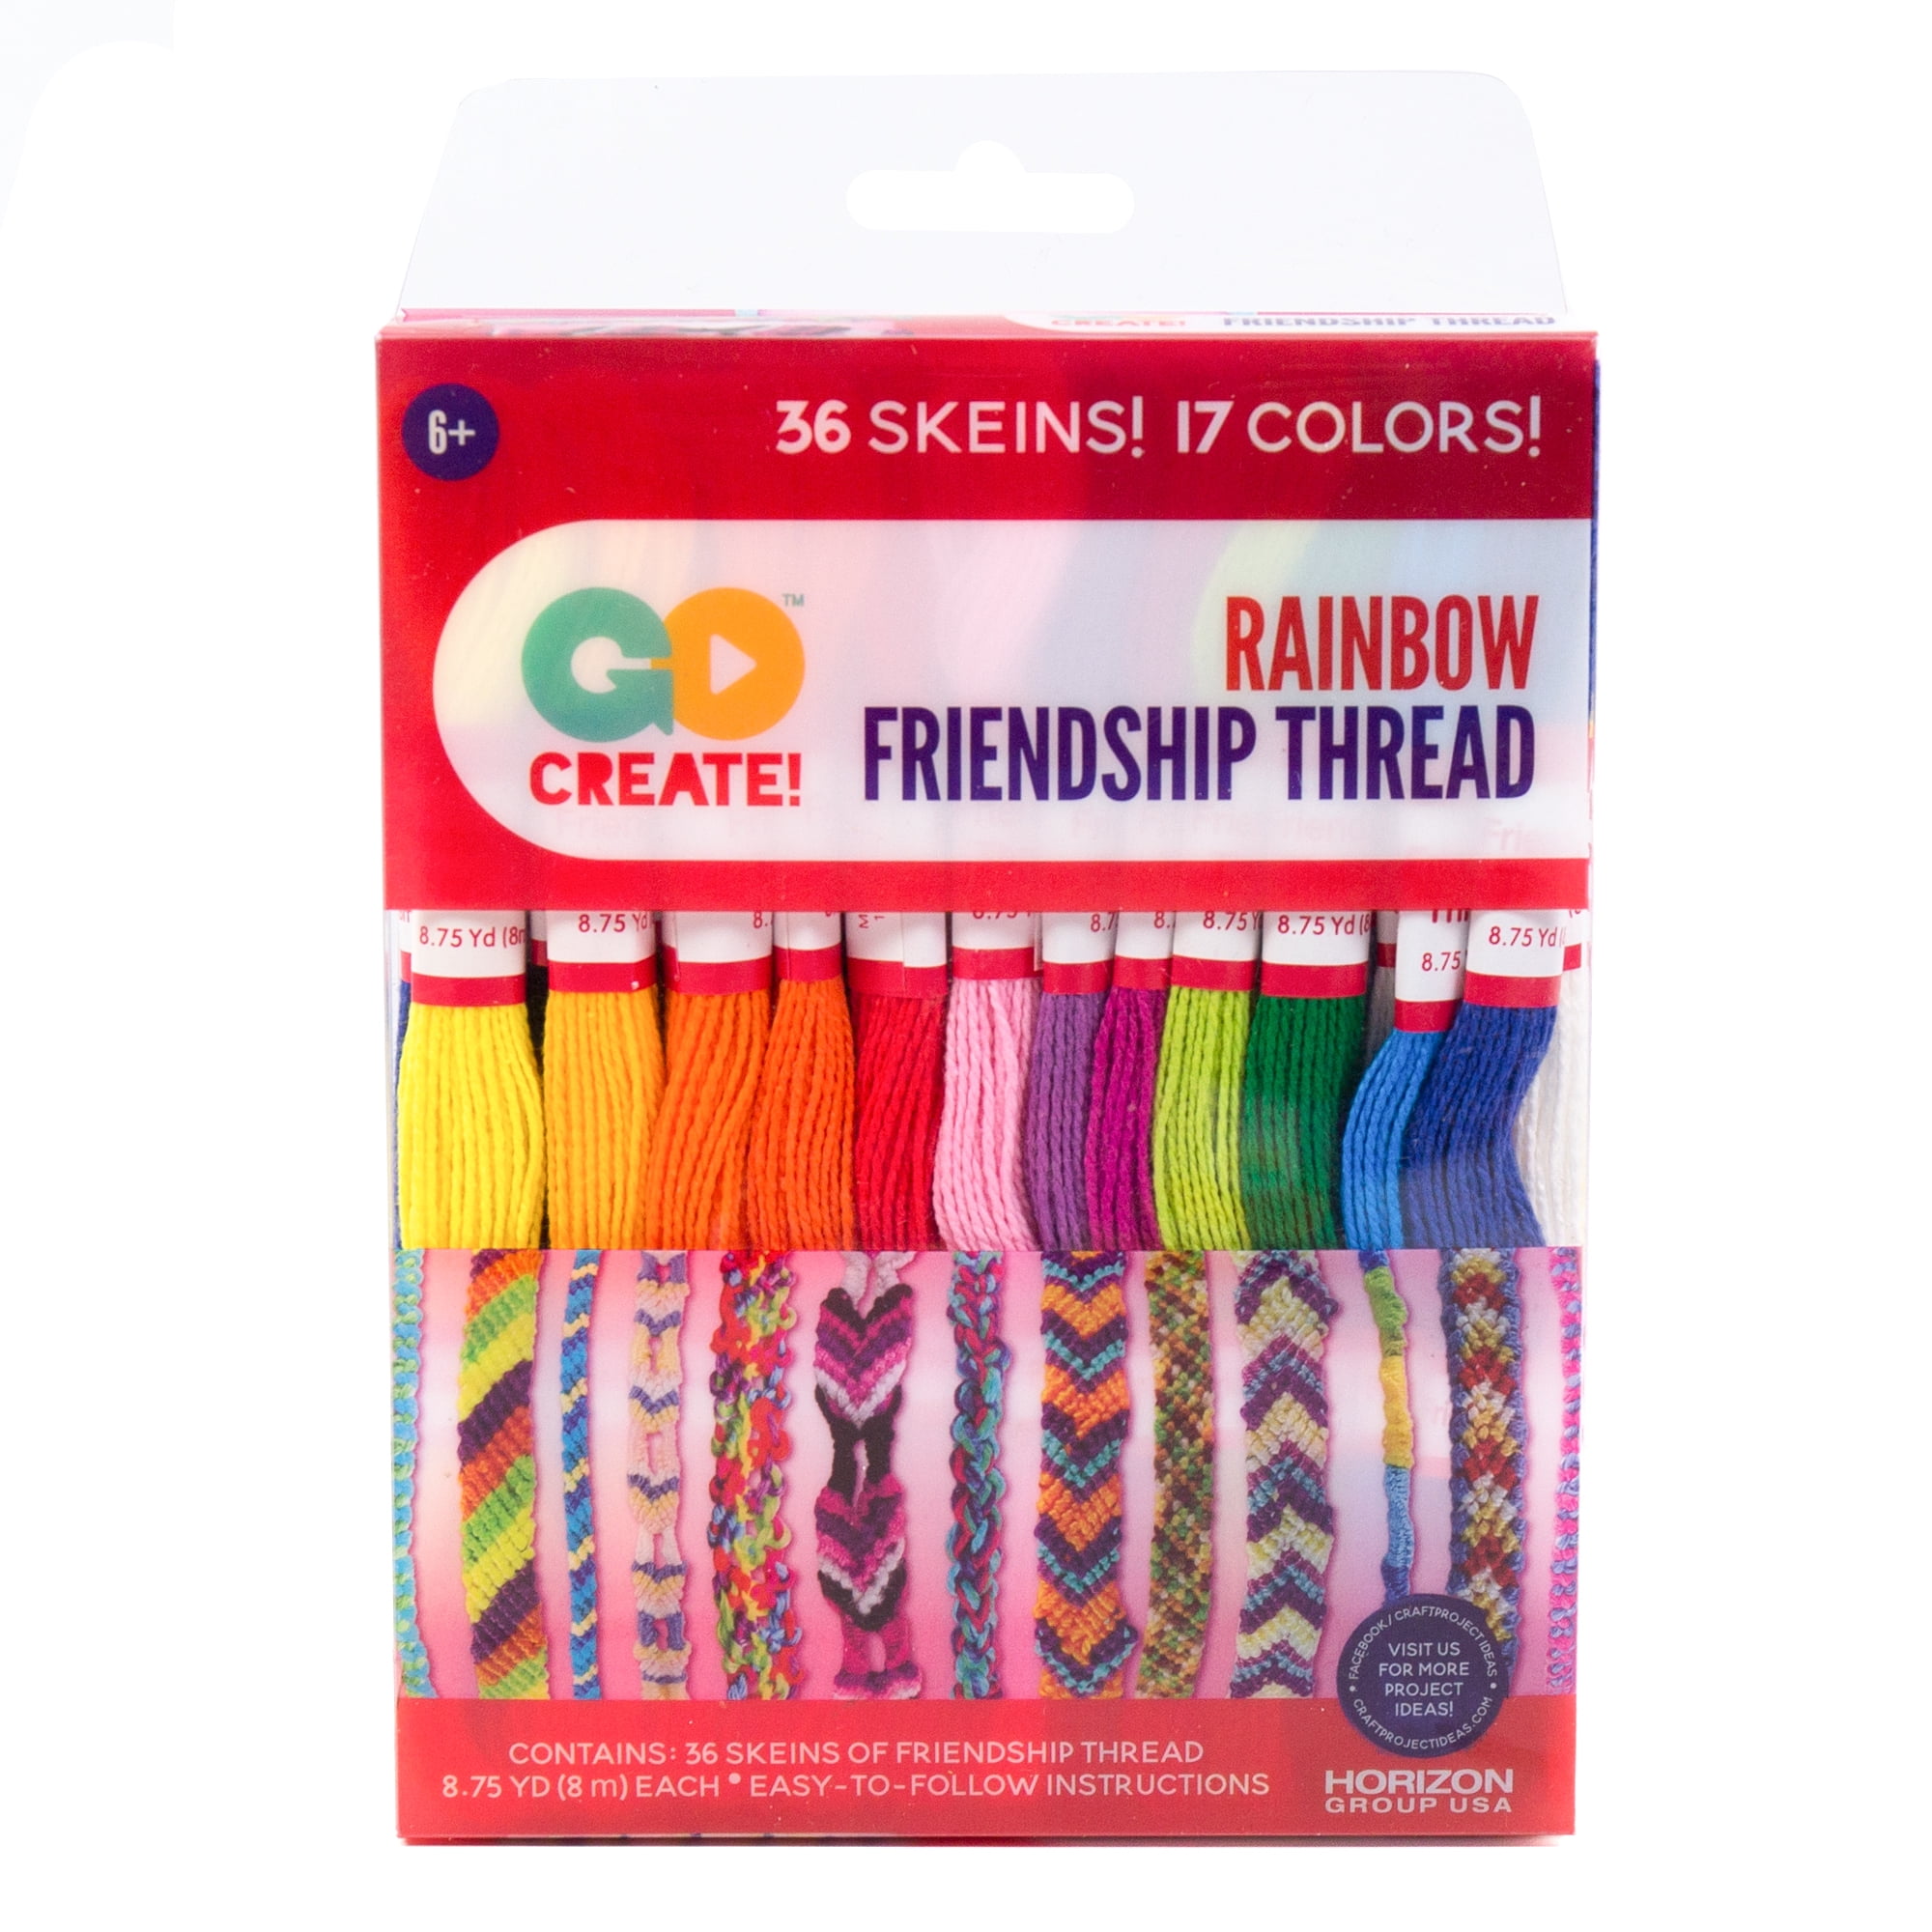 ThreadArt Premium Egyptian Long Fiber Cotton Embroidery Floss Thread Kit in  Rainbow Bright Colors - Six Strand Set for Hand Embroidery, Friendship